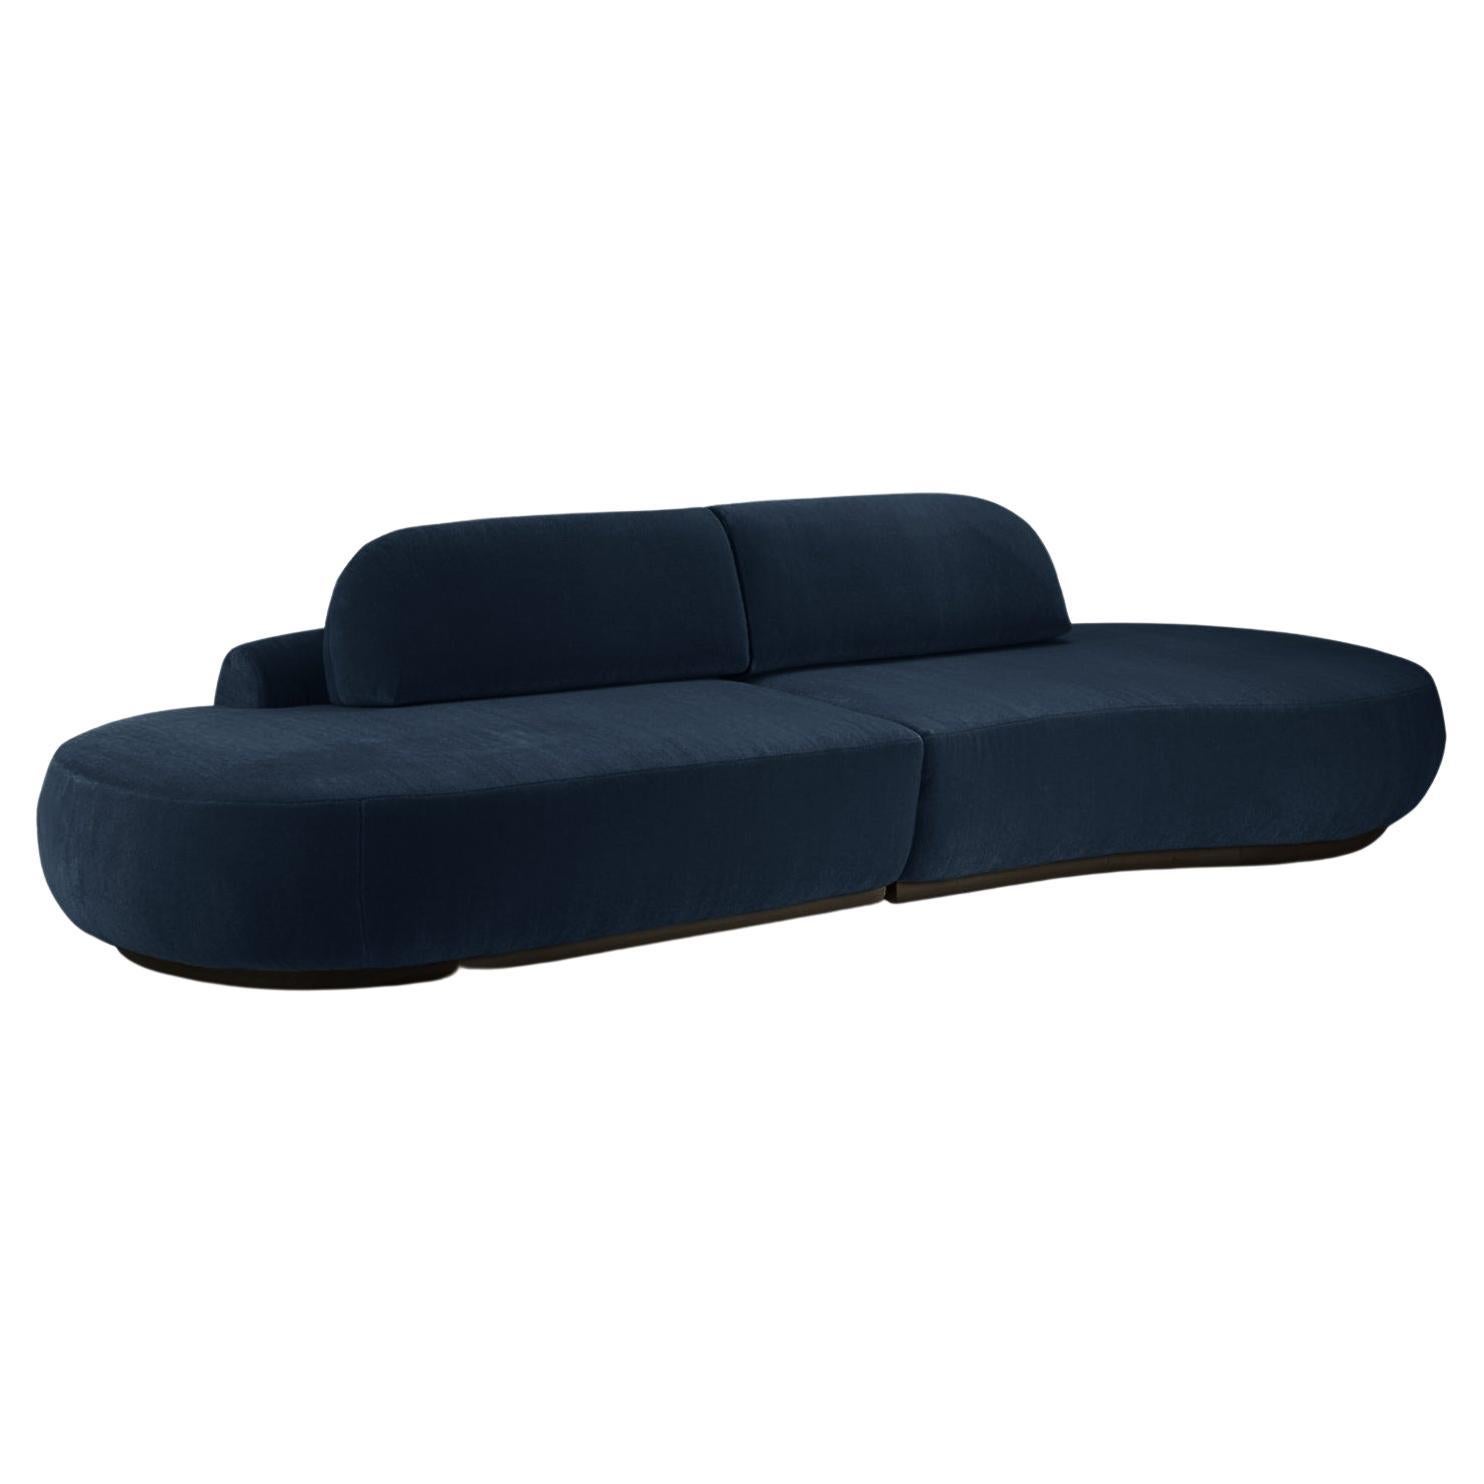 Naked Curved Sectional Sofa, 2 Piece with Beech Ash-056-5 and Paris Black